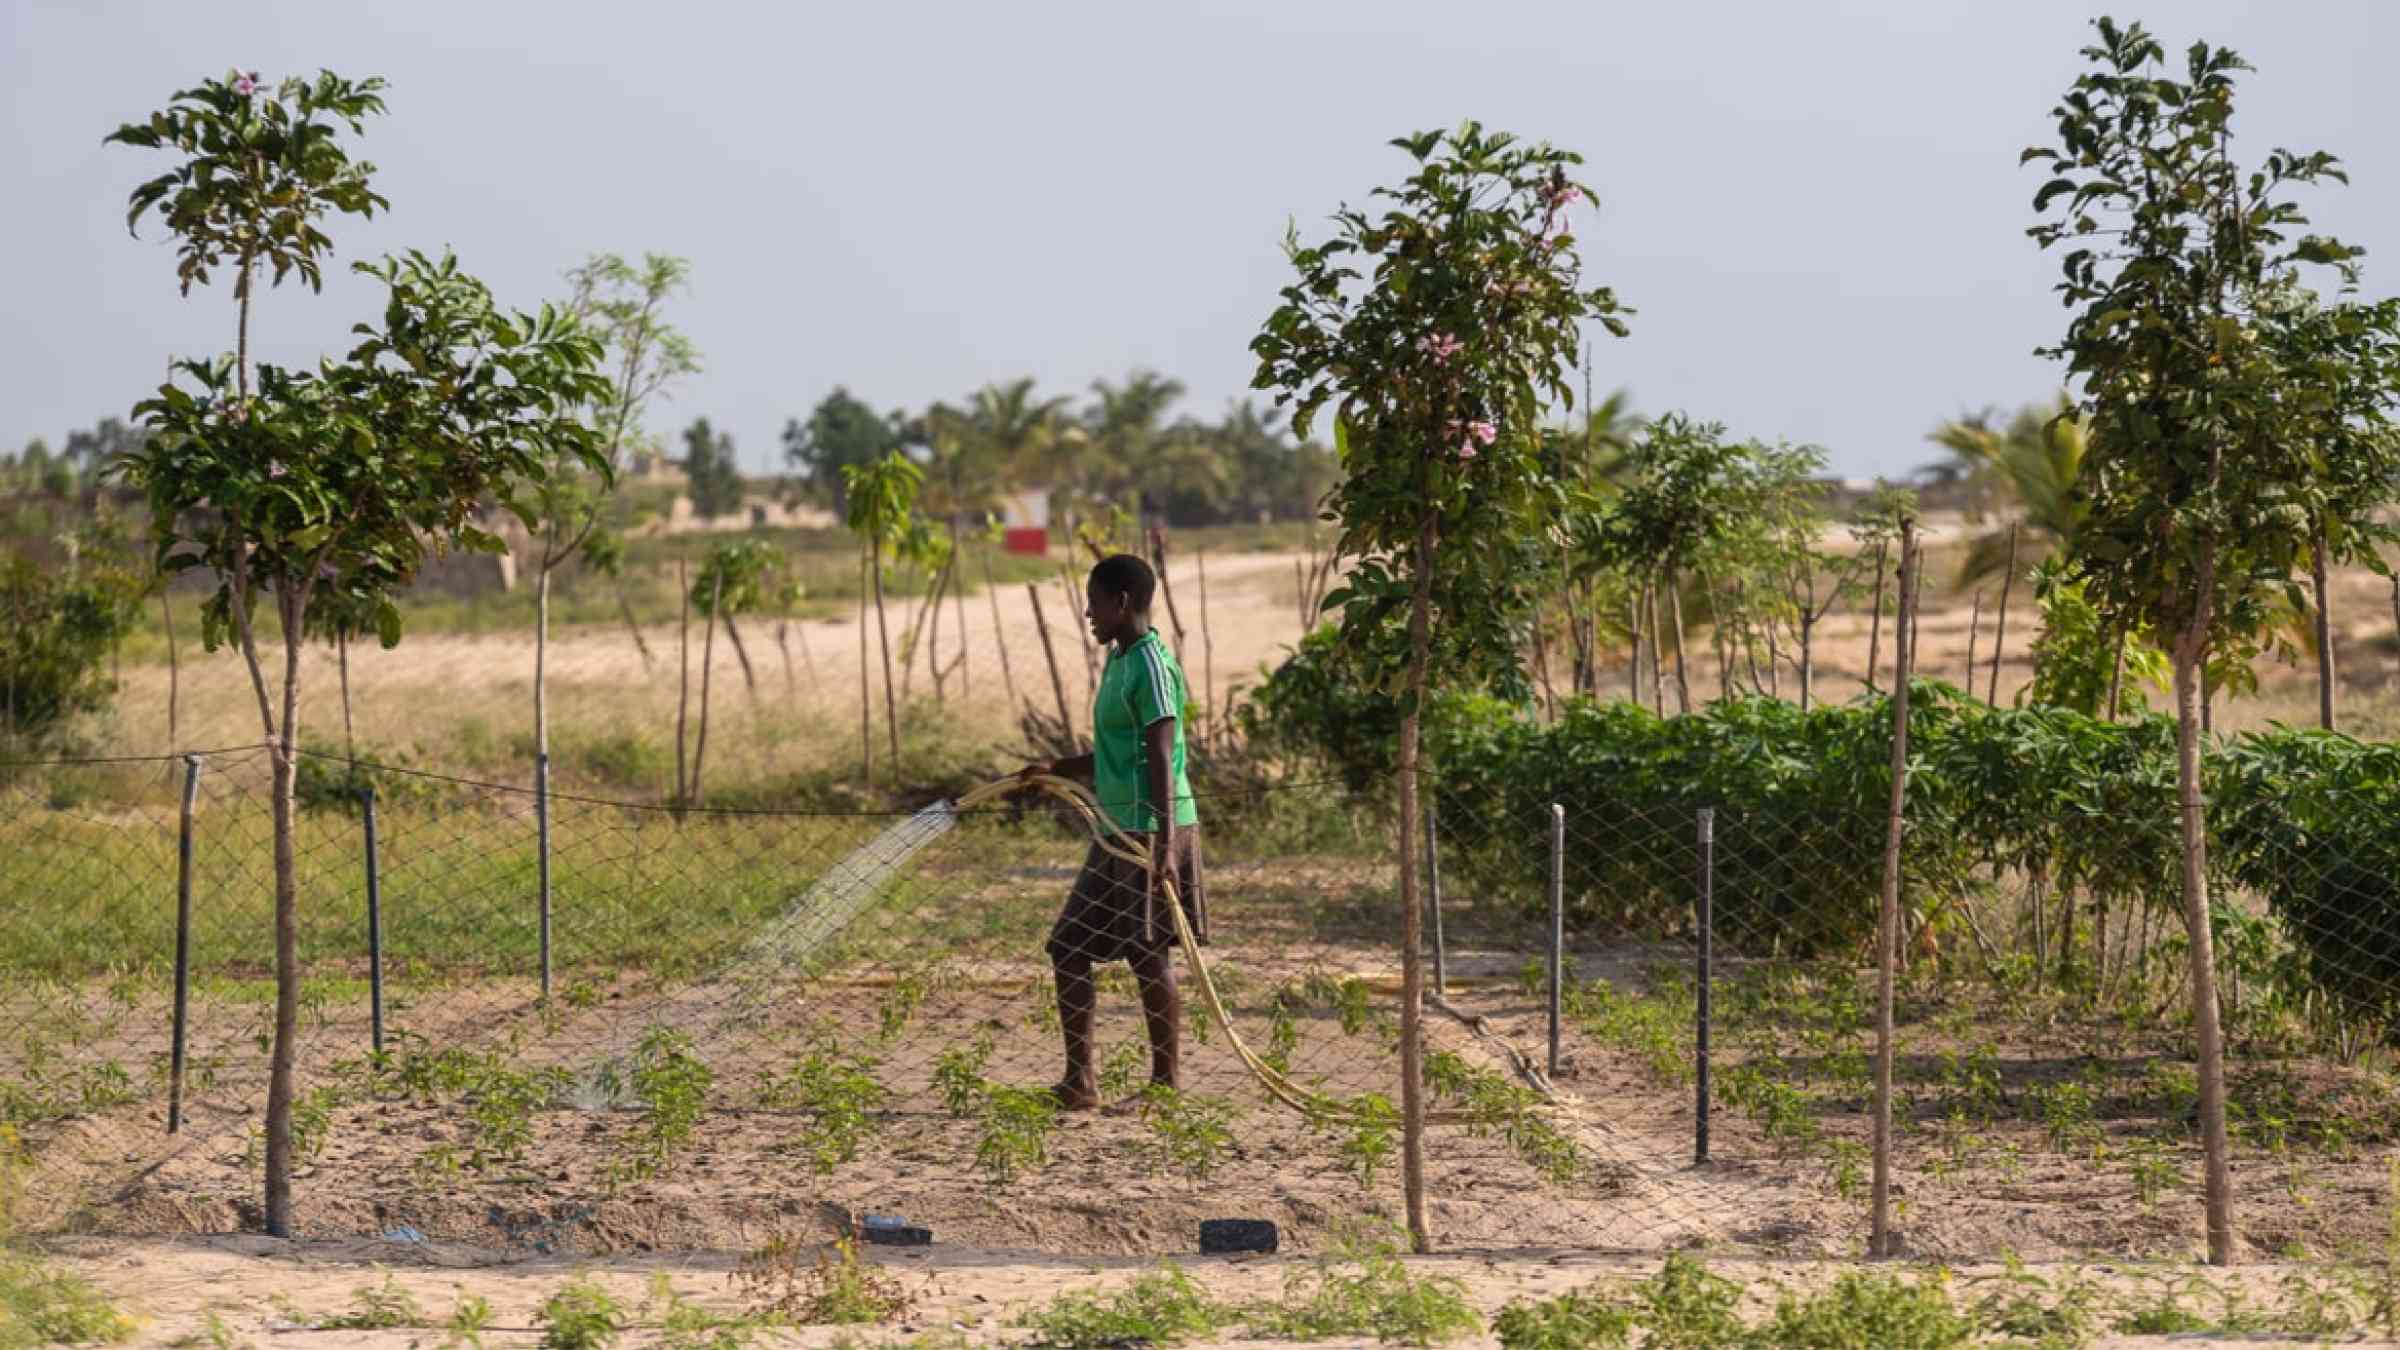 Young Ghana woman watering her land with newly planted fields in Ghana (2020).